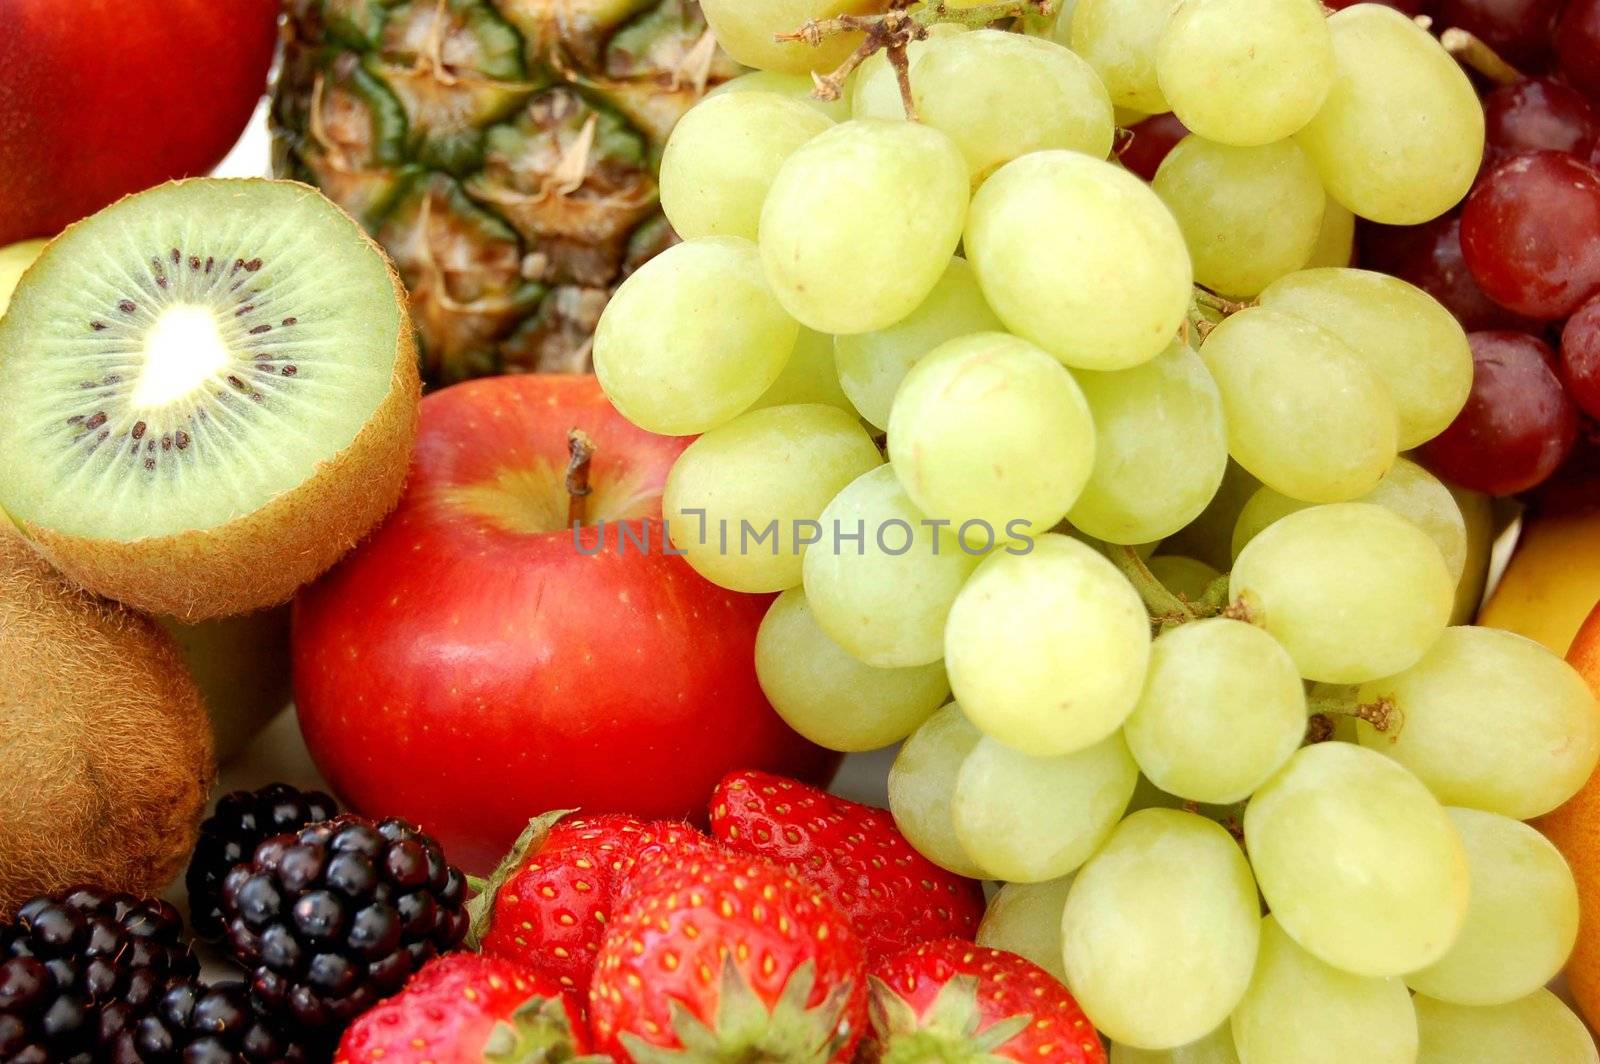 A delicious combination of different types of fruit